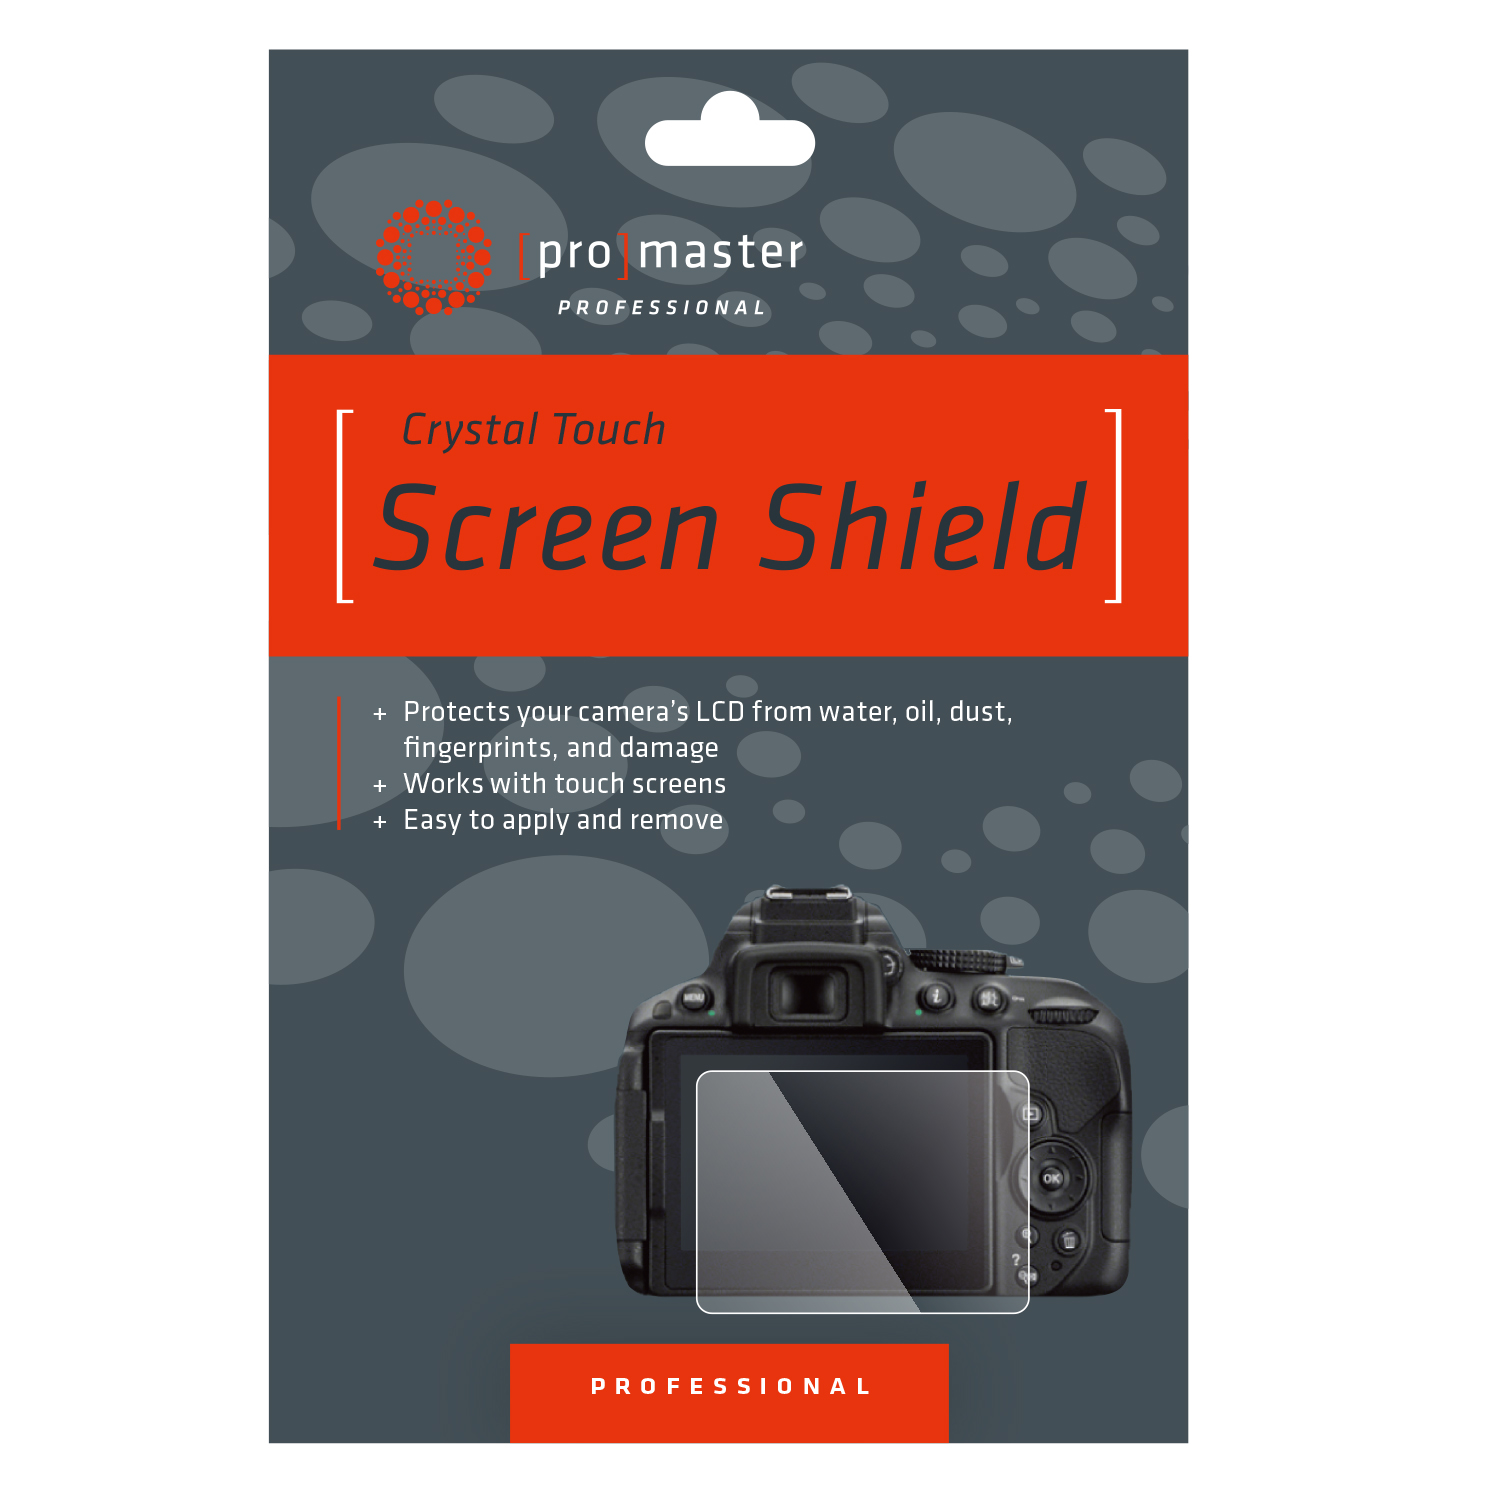 Promaster 1213 Crystal Touch Screen Shield - Canon R6, R6ii, R7